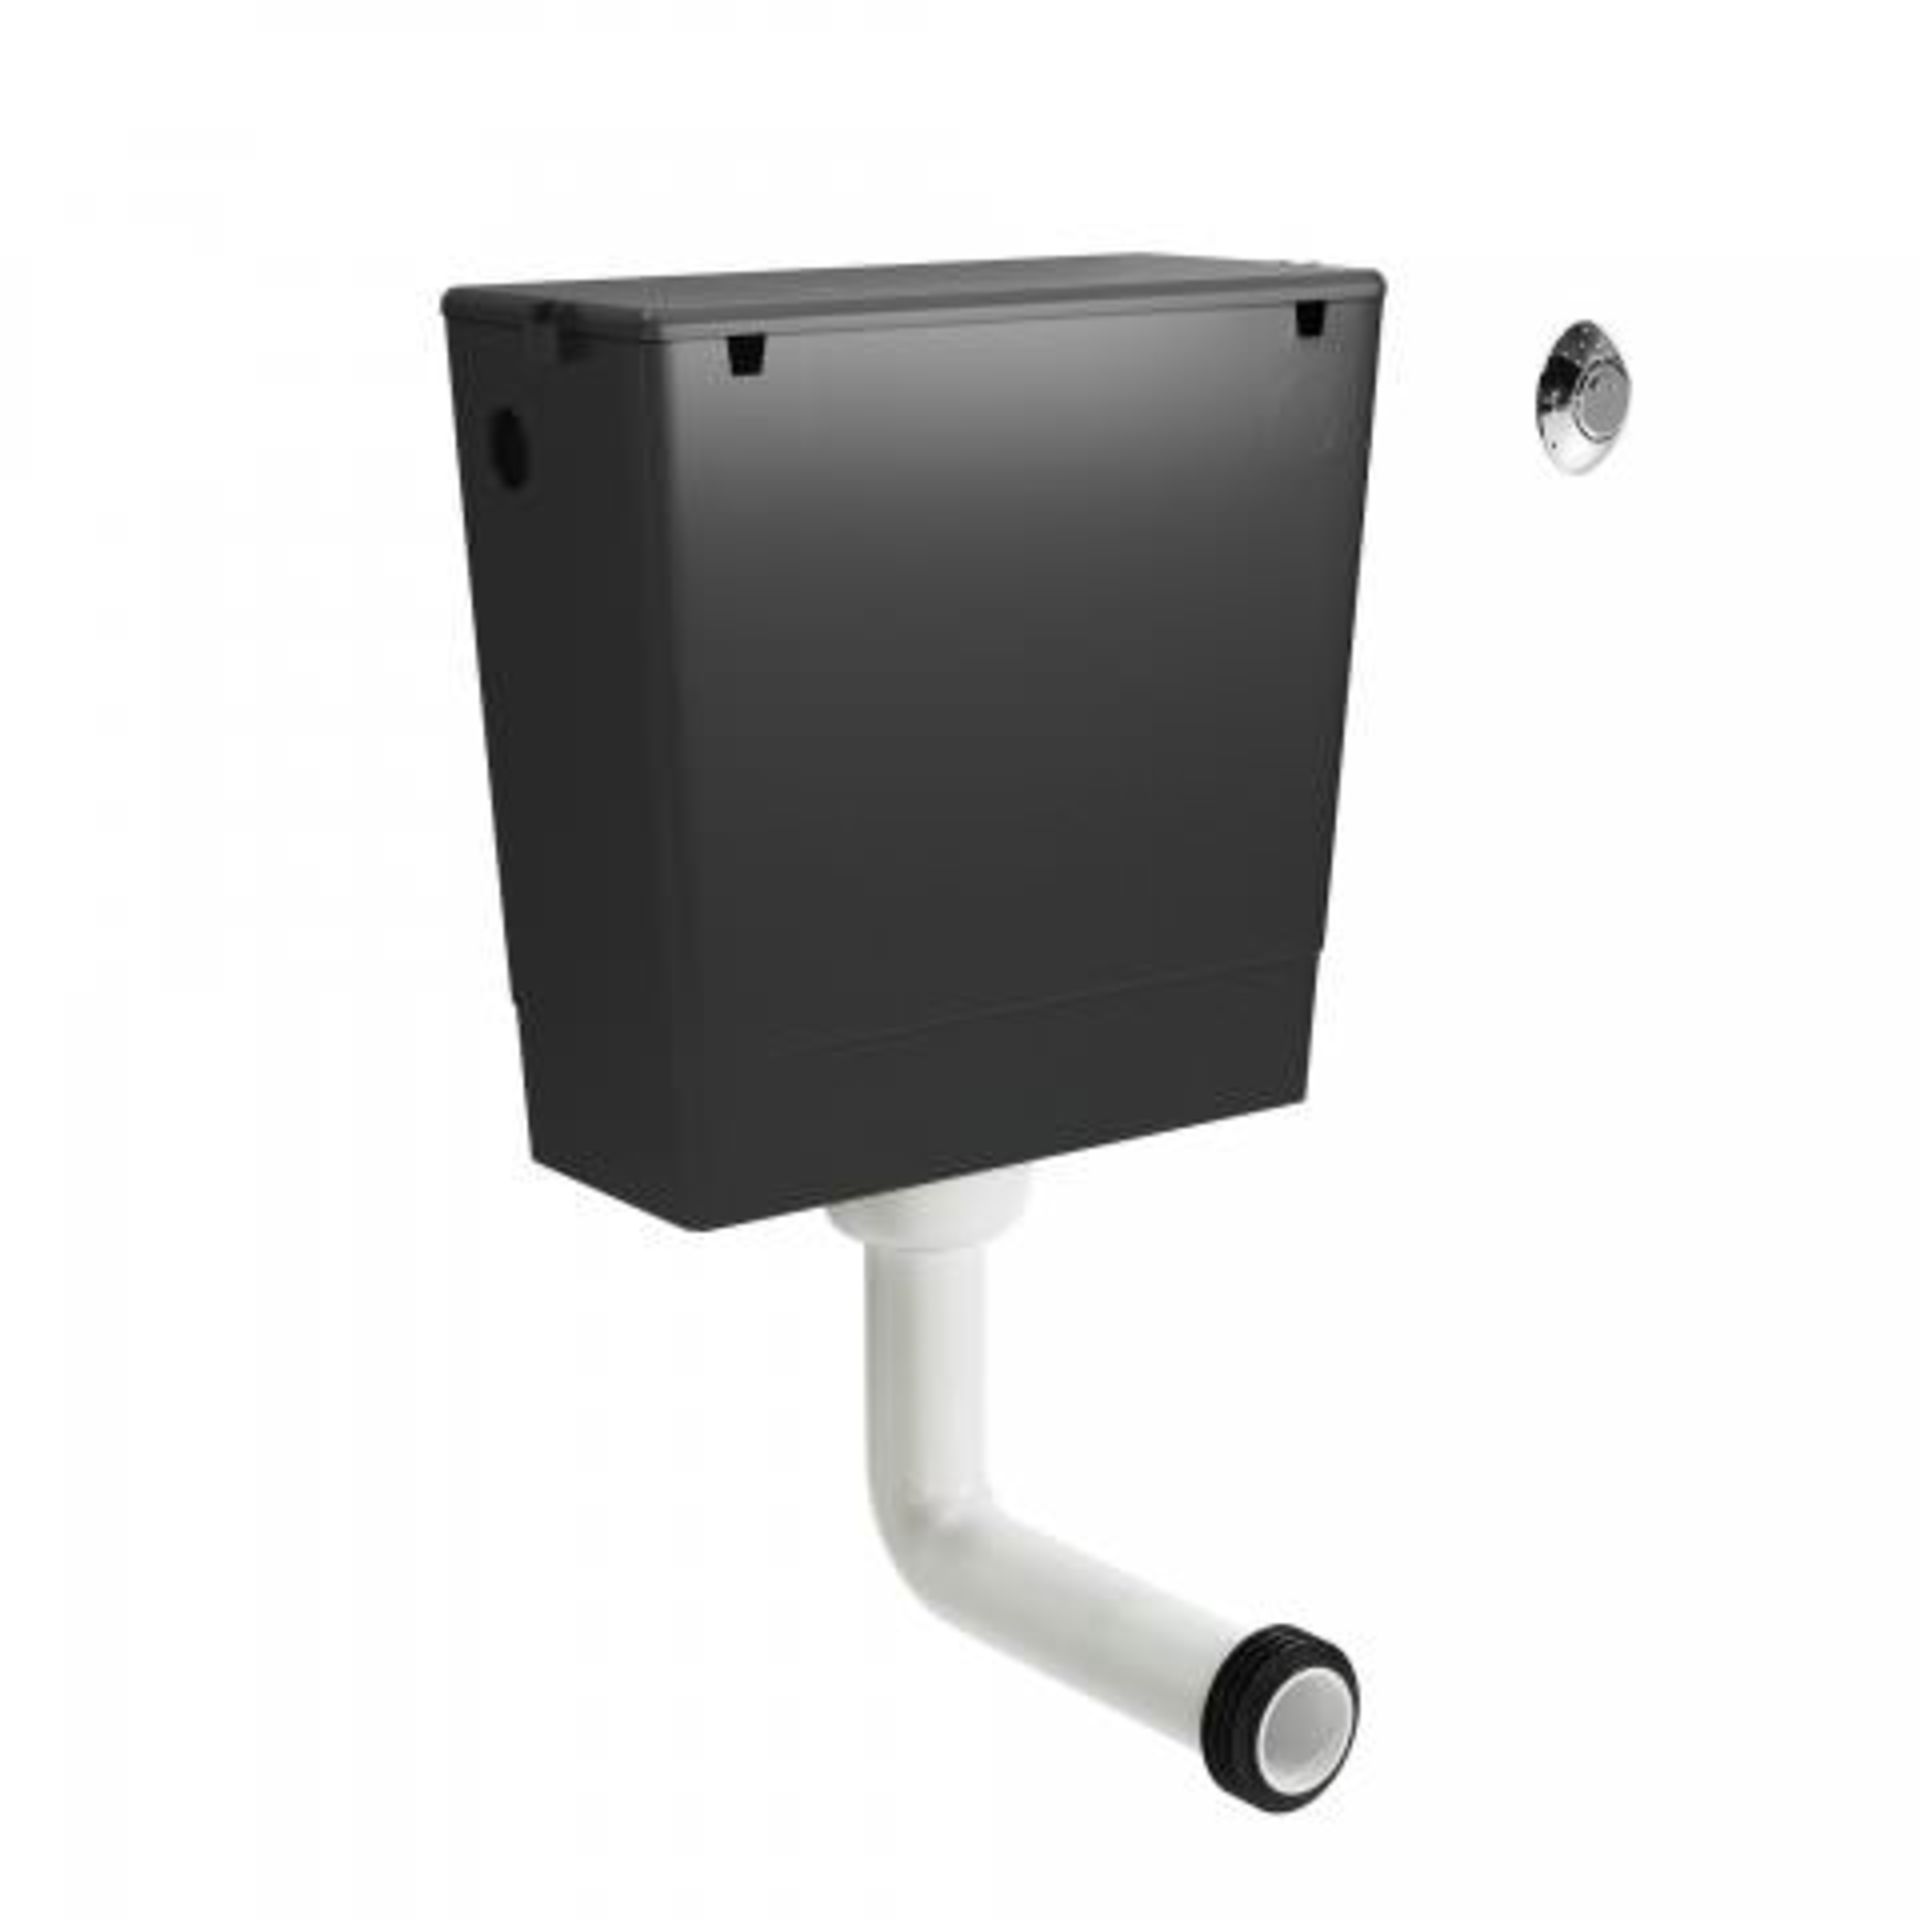 (I153) Wirquin Dual Flush Concealed Cistern. RRP £69.99. This Dual Flush Concealed Cistern is